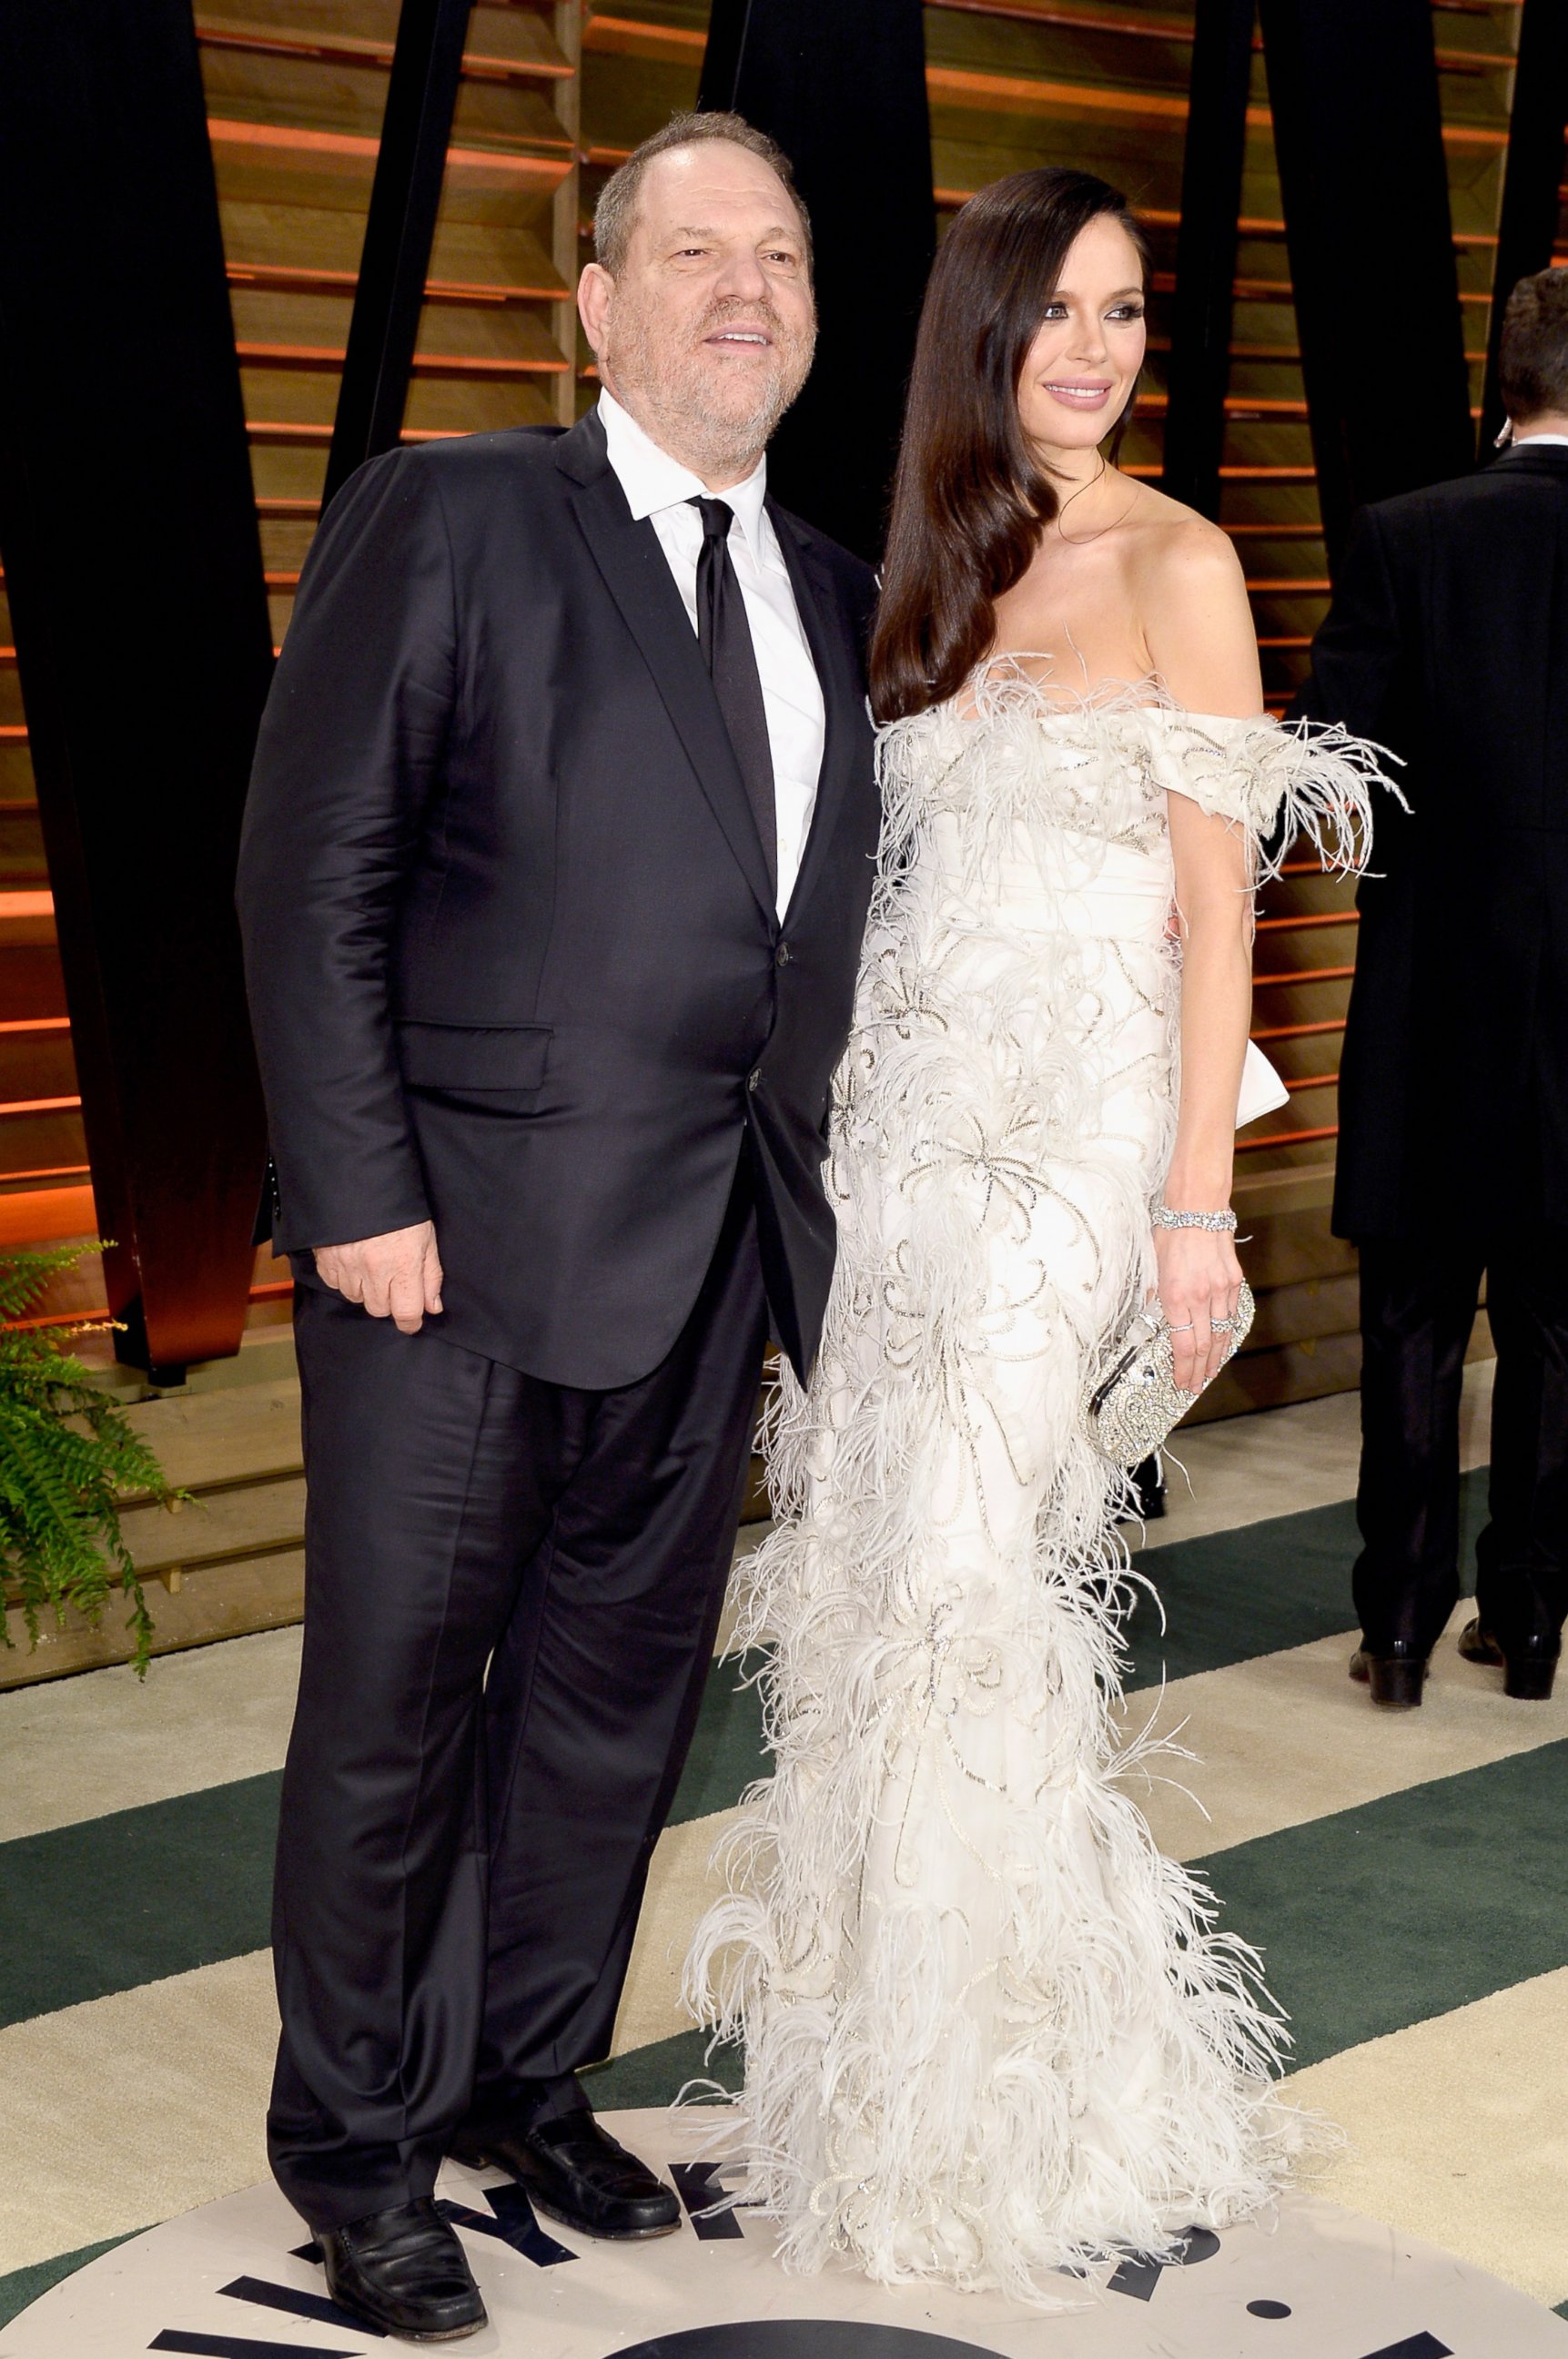 PHOTO: Studio executive Harvey Weinstein and fashion designer Georgina Chapman attends the 2014 Vanity Fair Oscar Party hosted by Graydon Carter on March 2, 2014. 